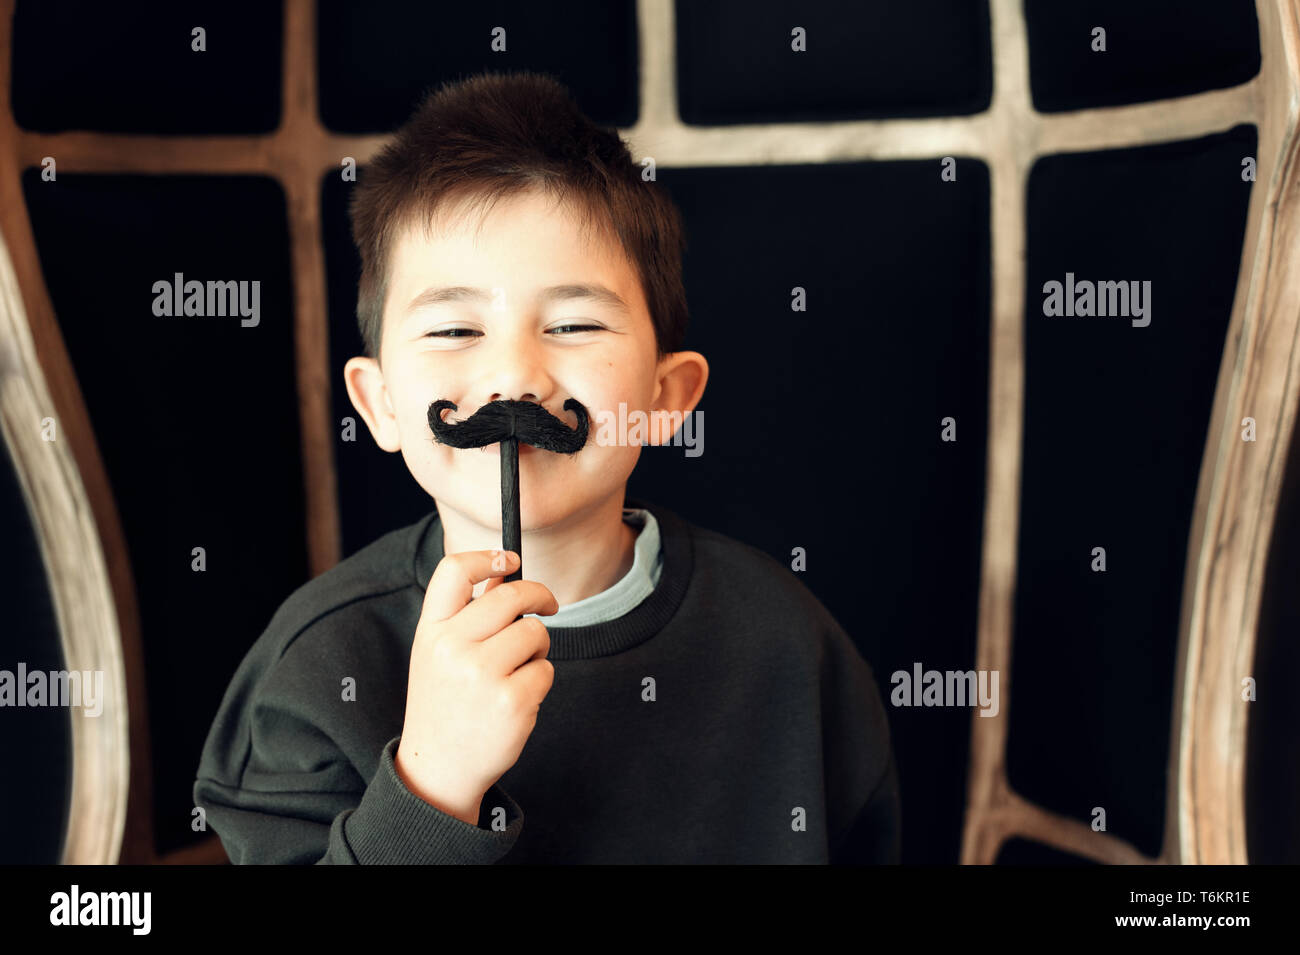 Happy kid posing with a fake moustache on black background Stock Photo